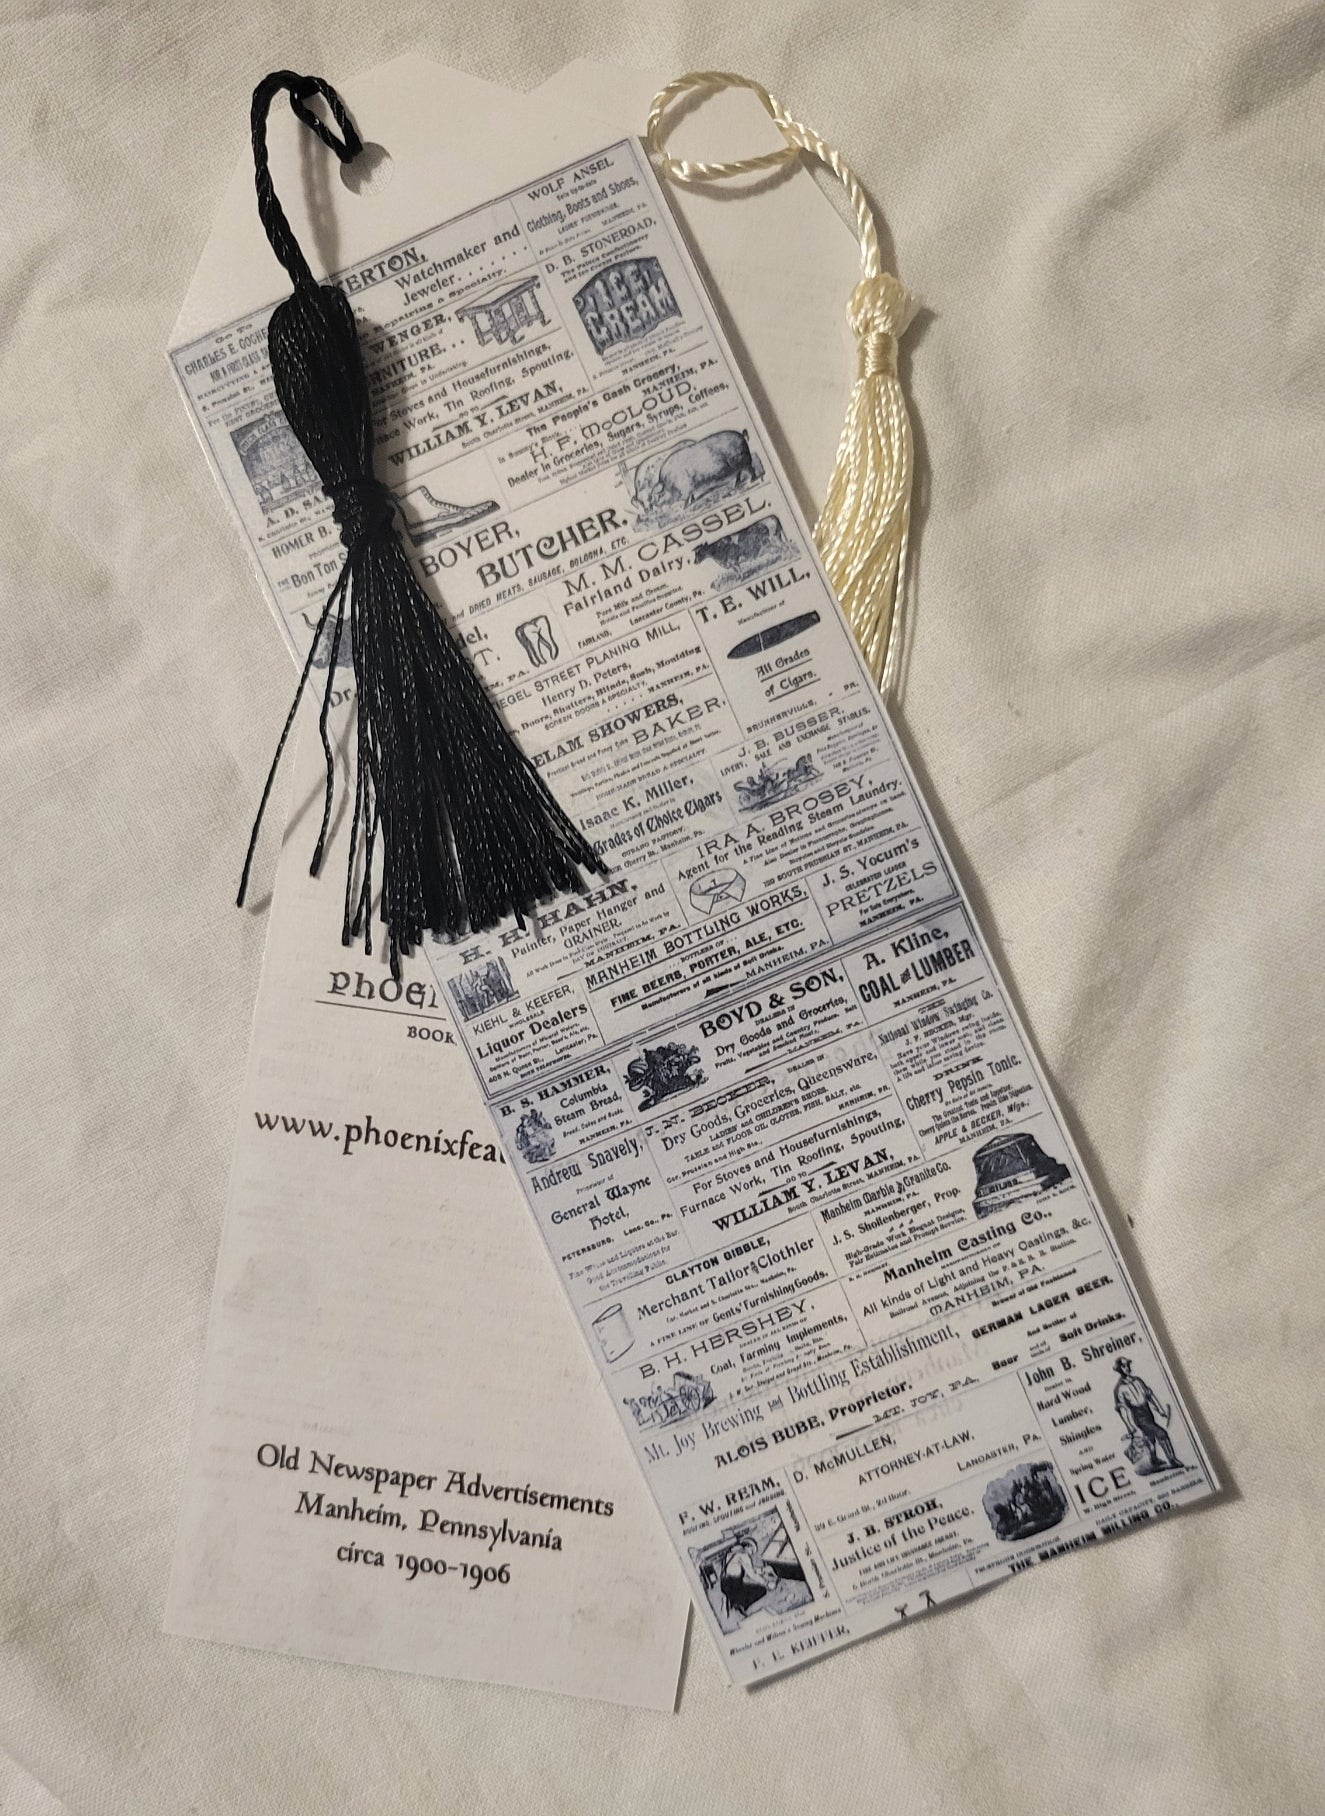 Handmade bookmark by Phoenix Feather Books & Curios with vintage advertisements from Manheim, Pennsylvania.